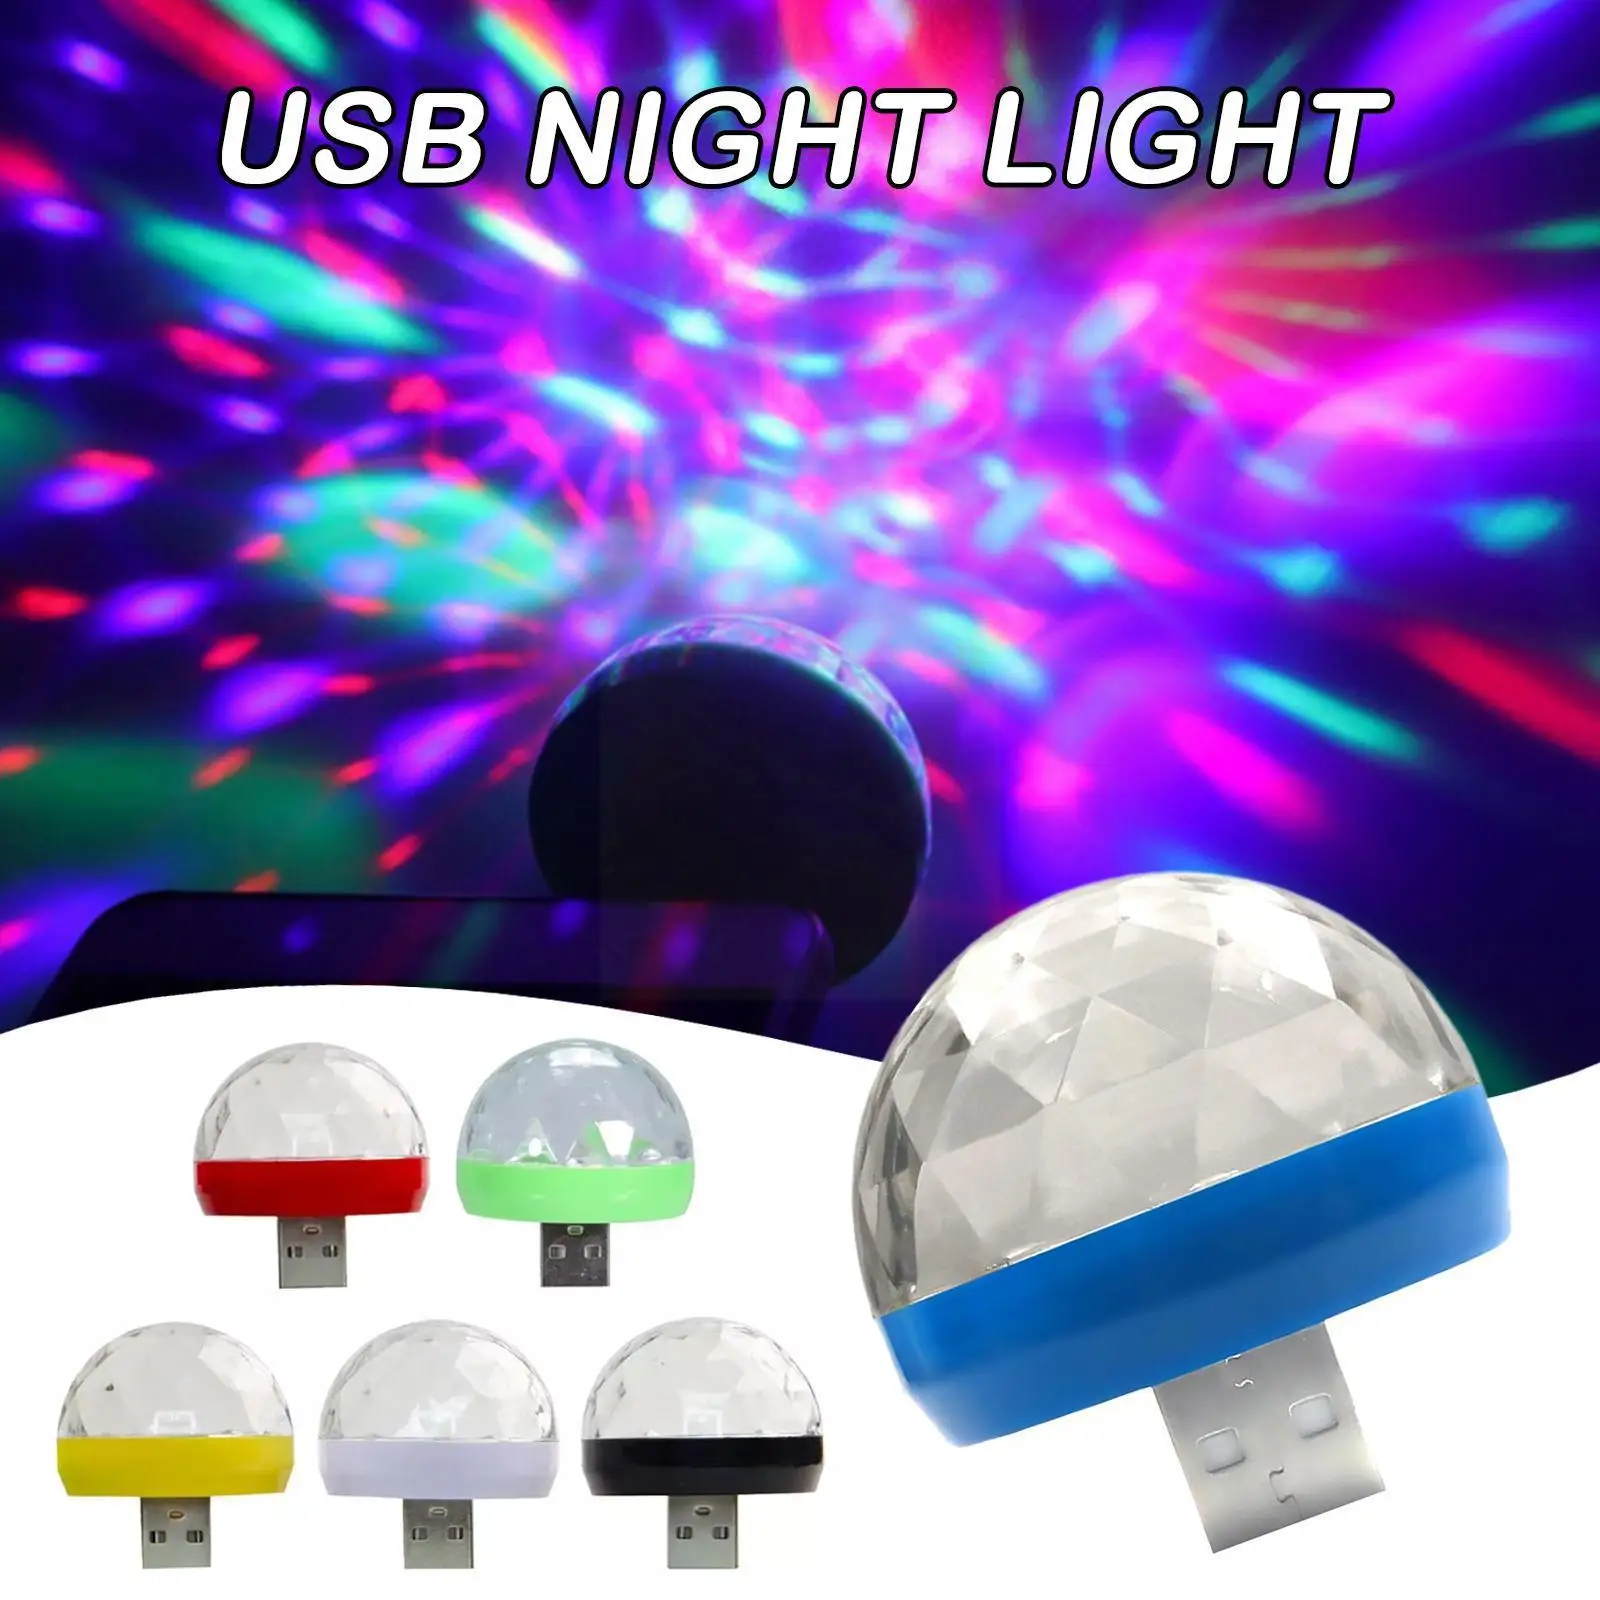 

Mini Universal Usb Magic Crystal Ball Night Light Disco Stage Lighting Effect Lamp Colorful Led Atmosphere Light For Home P C8f2